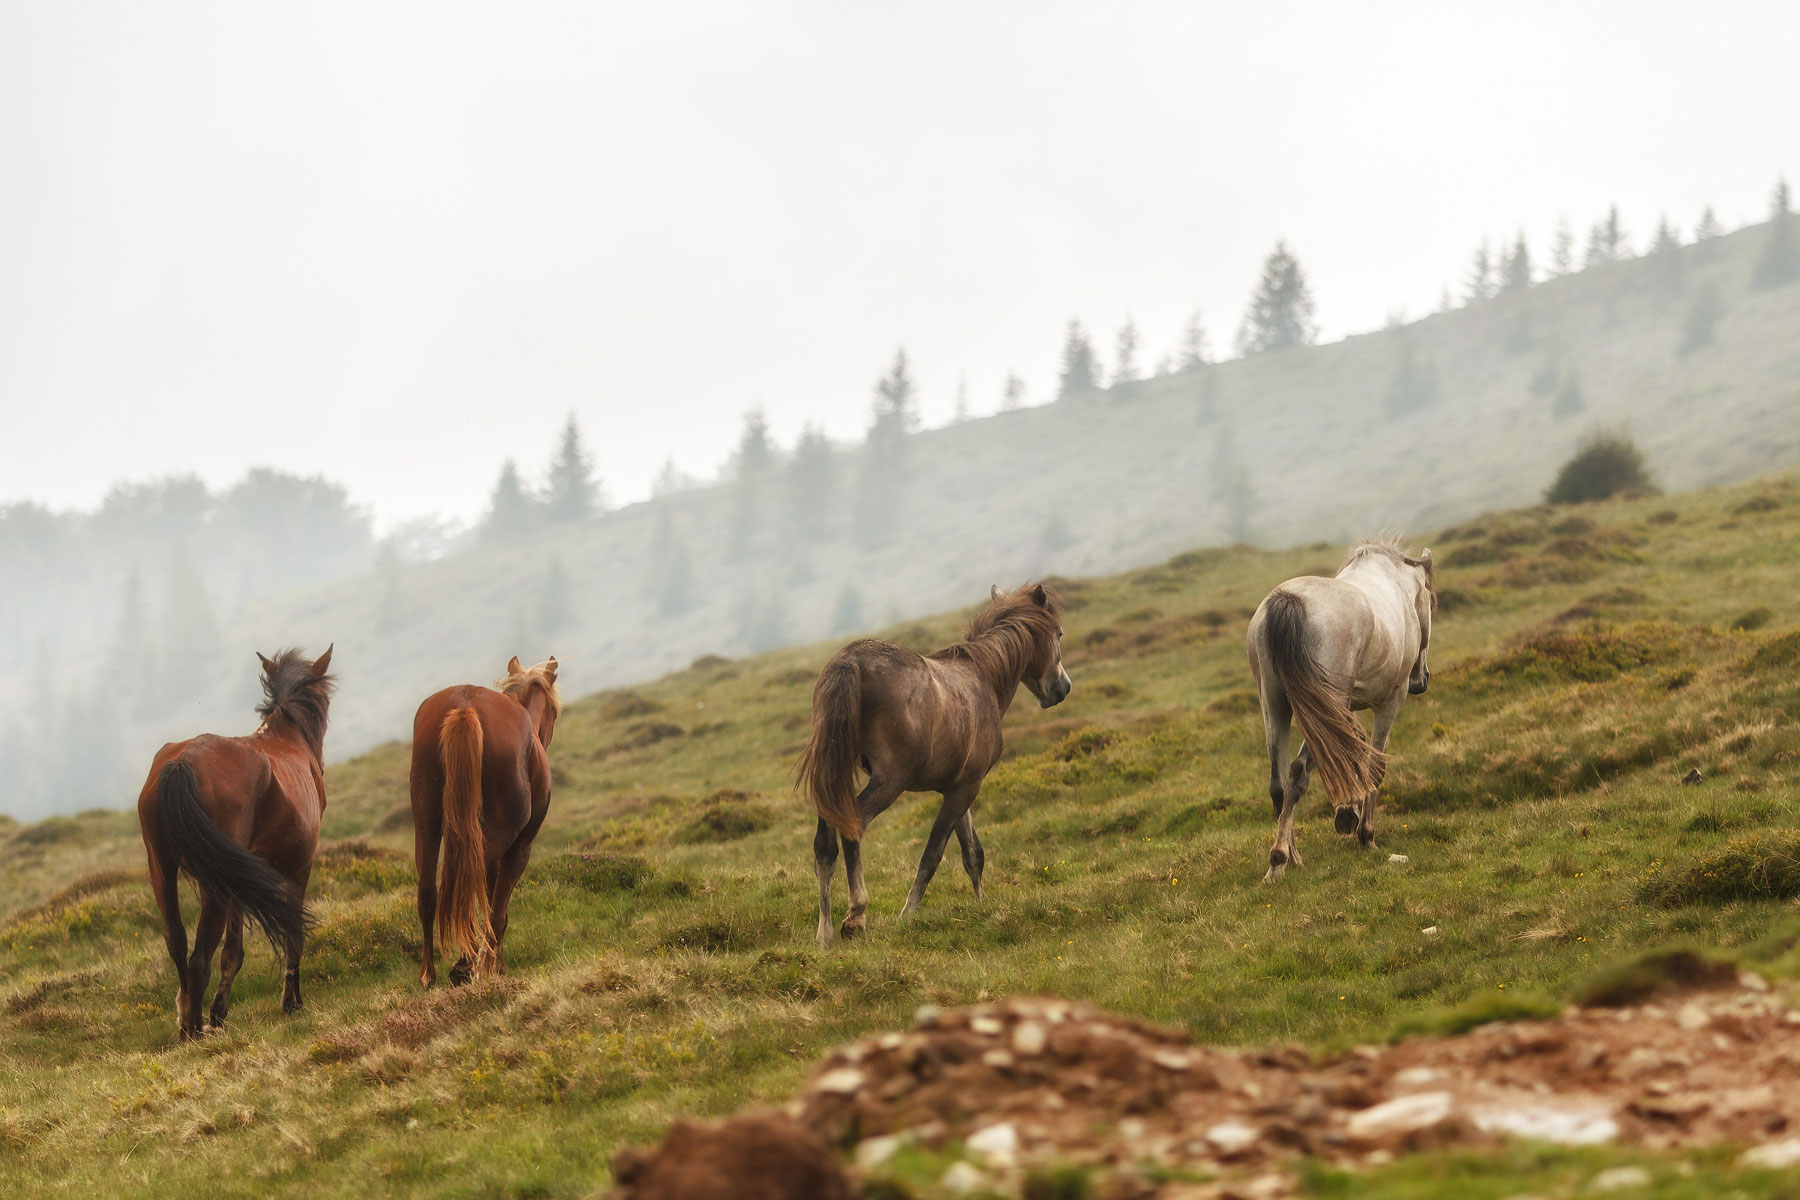 Horses on a hill